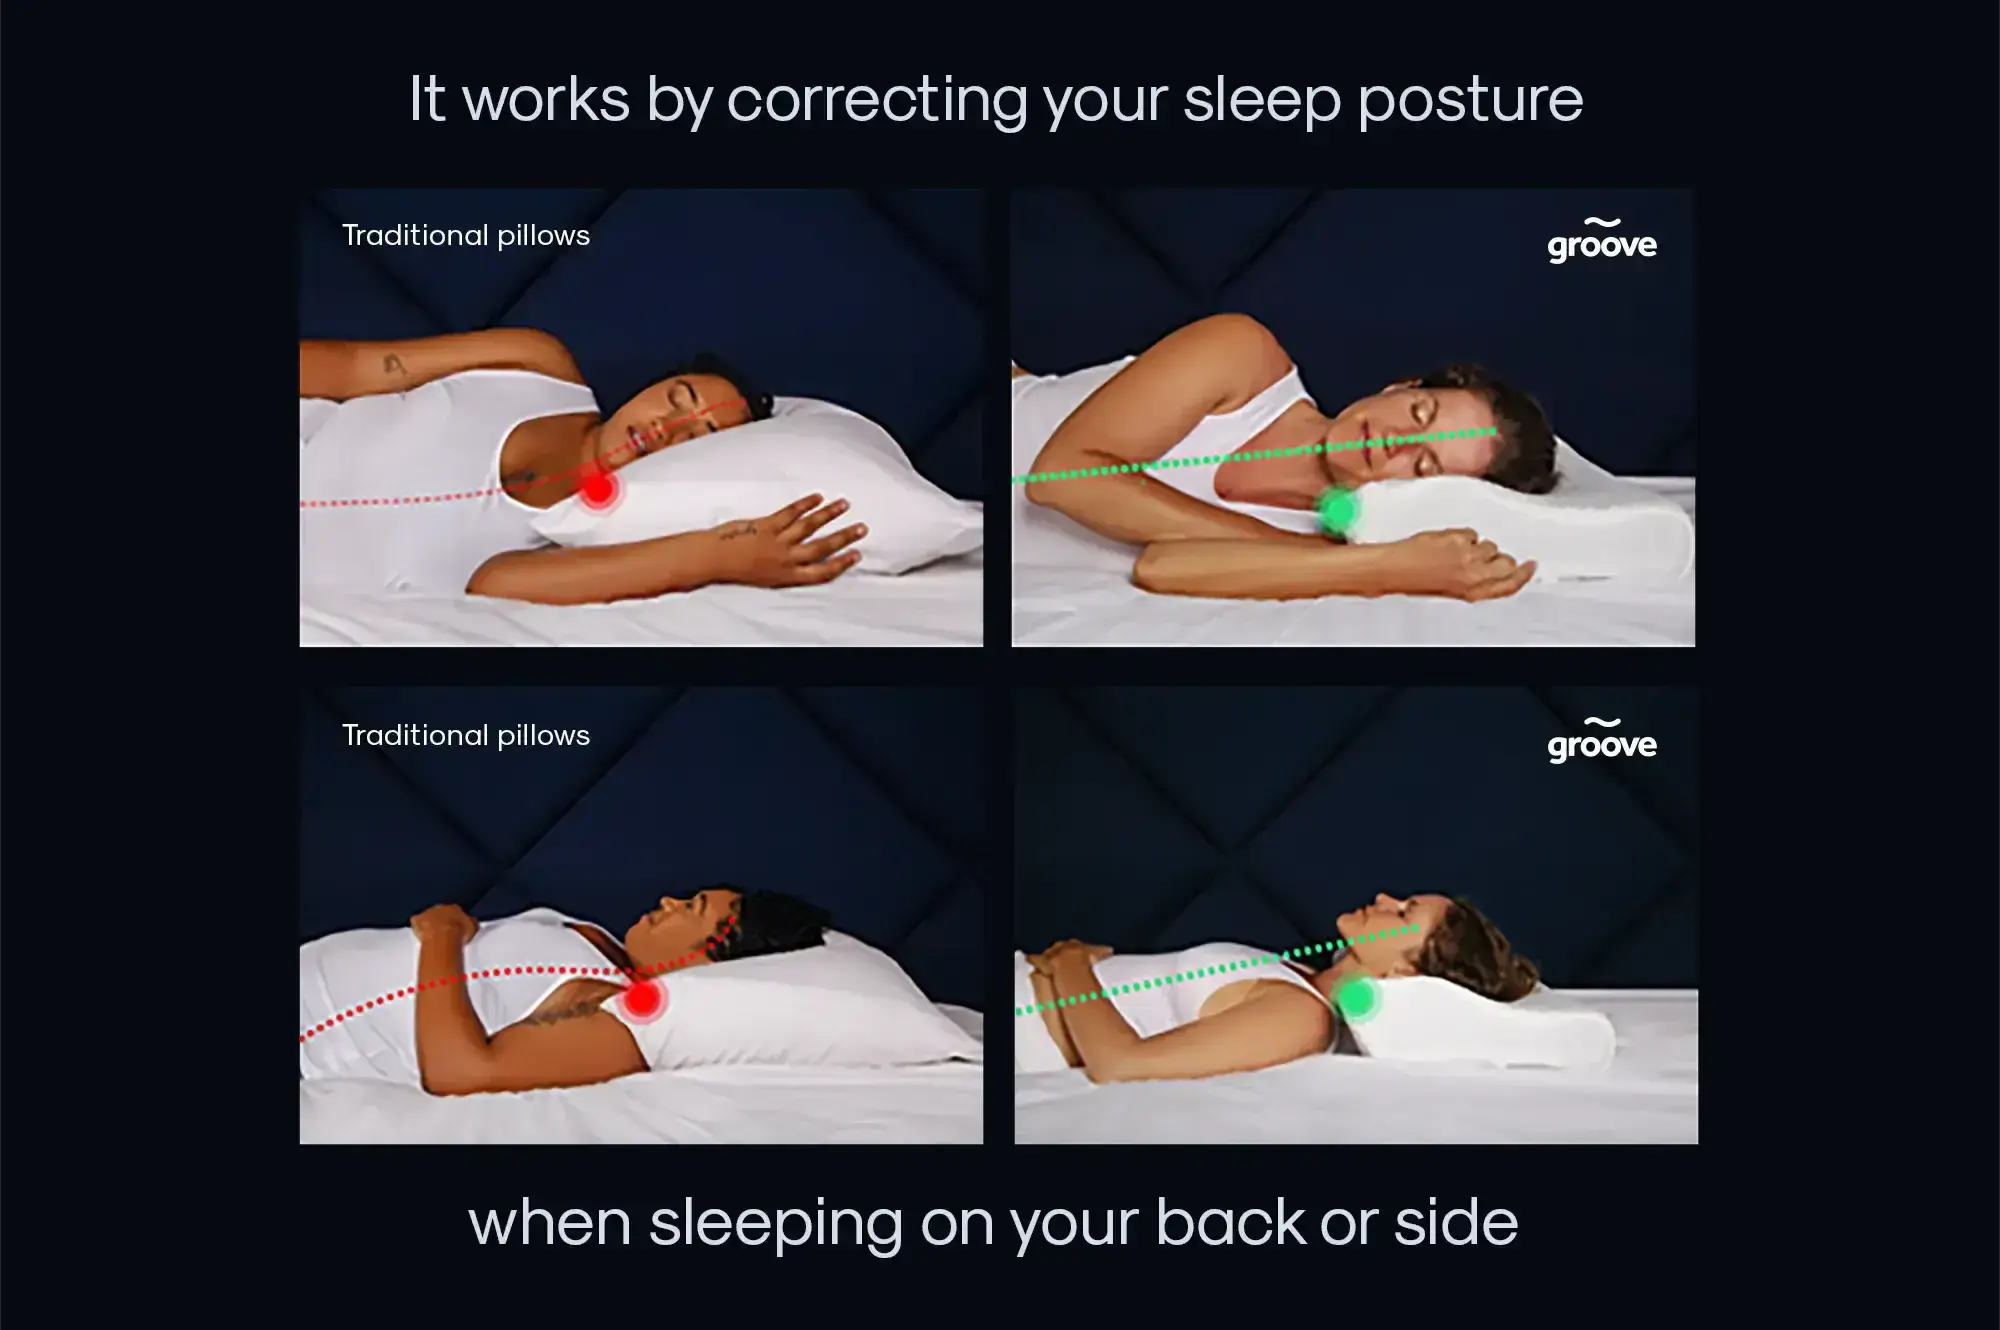 correct neck alignment when sleeping on side or back with pillow